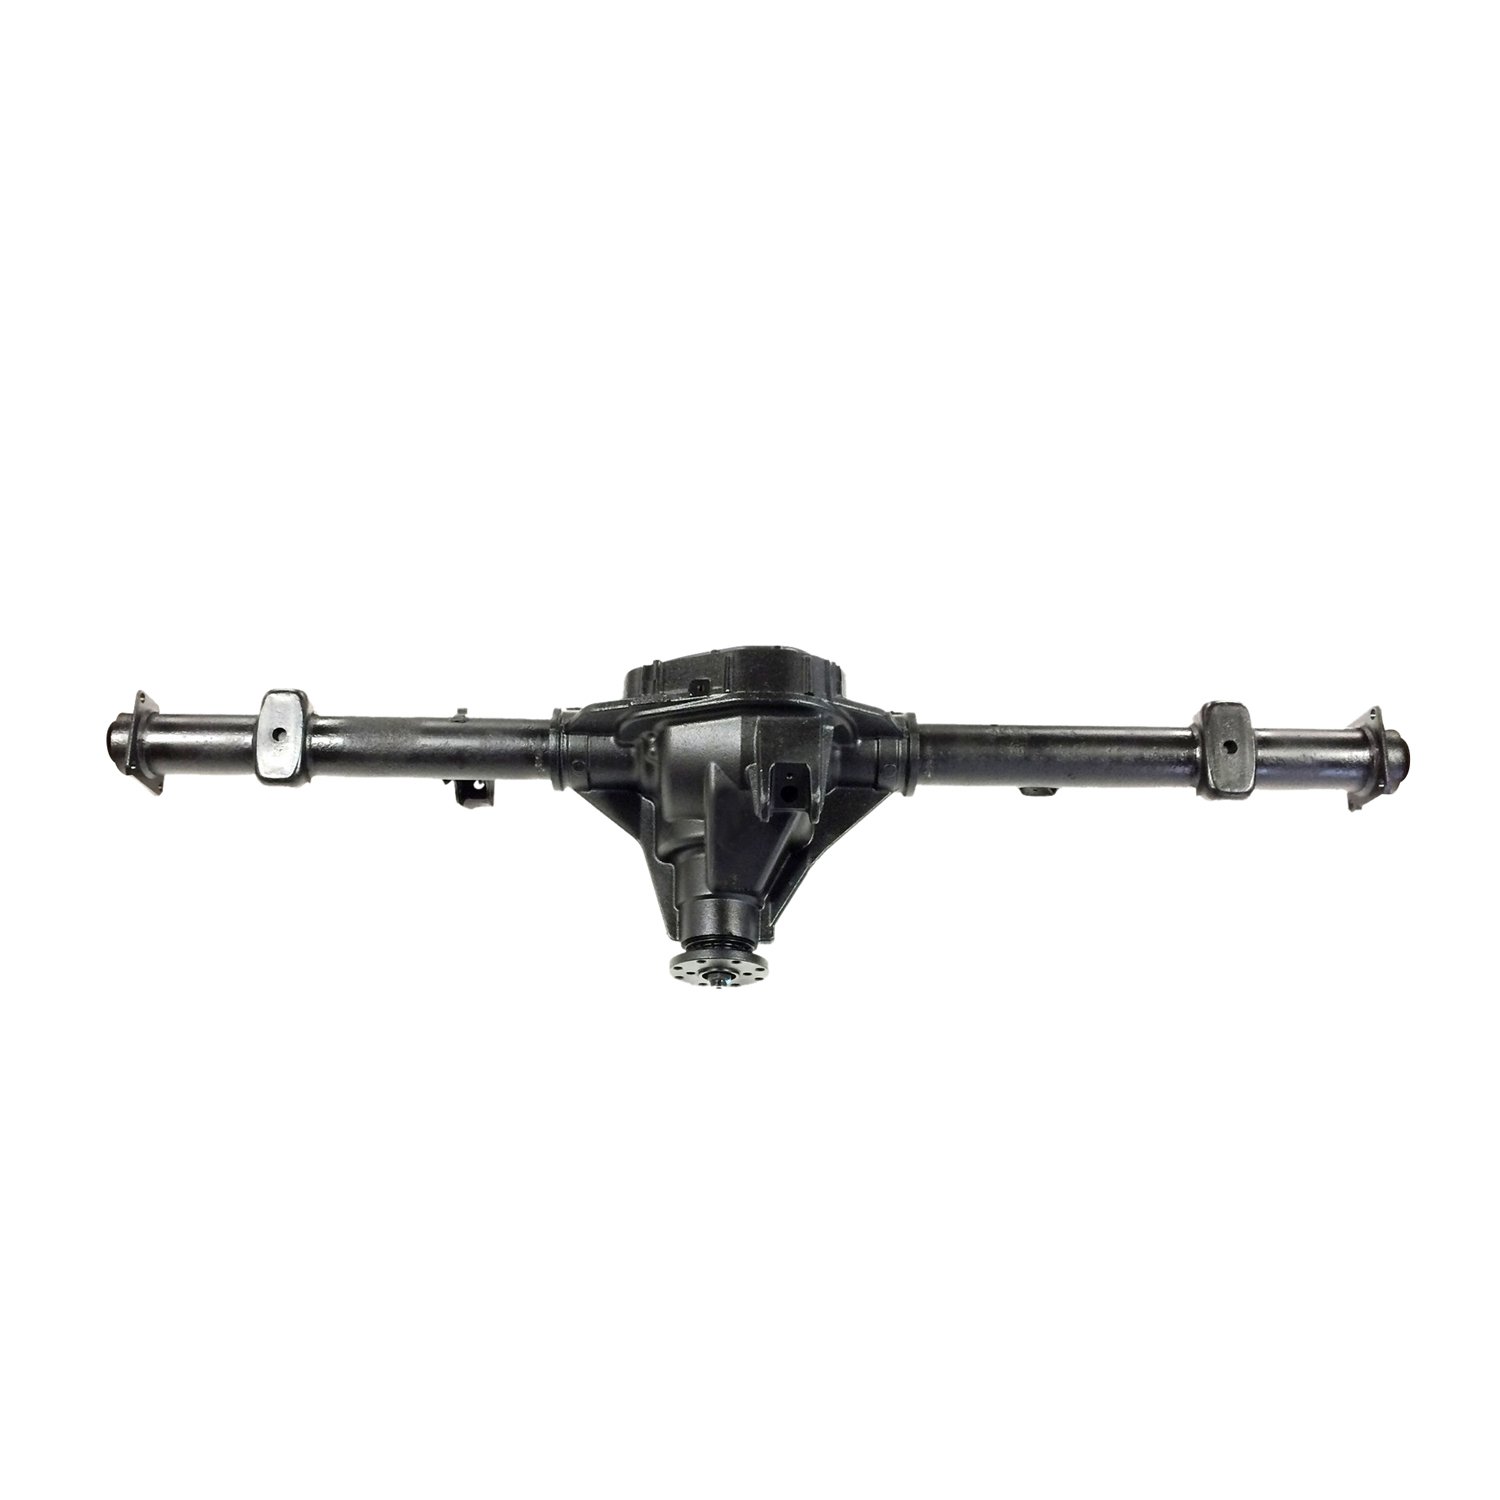 Remanufactured Axle Assy for 9.75" 98-99 F150 3.55 , Rear Disc, Posi LSD *Check Tag*